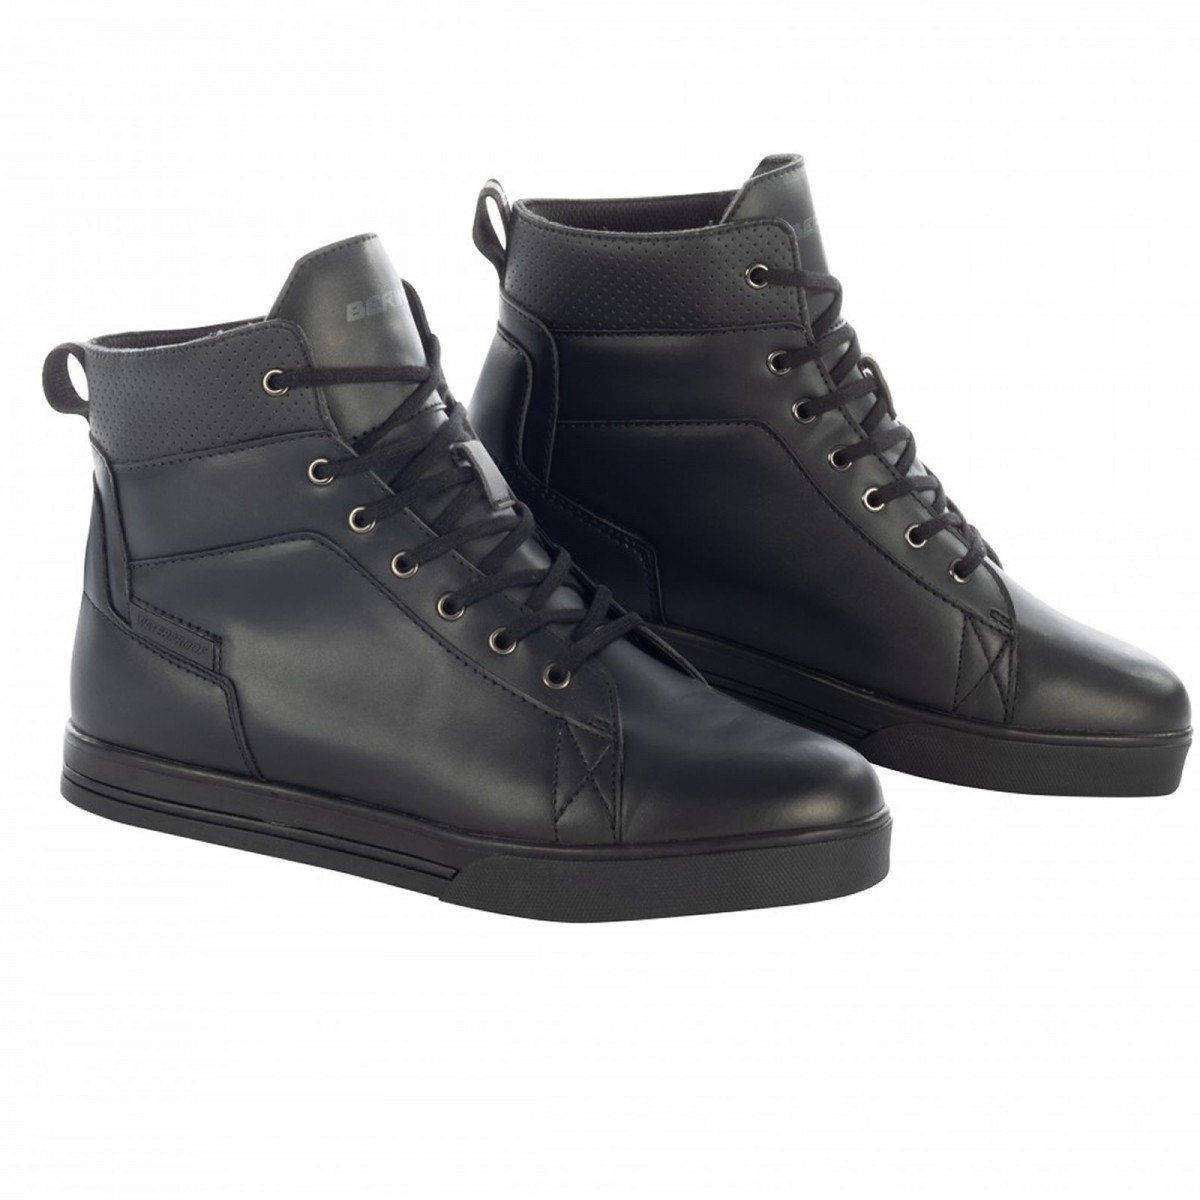 Image of Bering Indy Noir Chaussures Taille 42